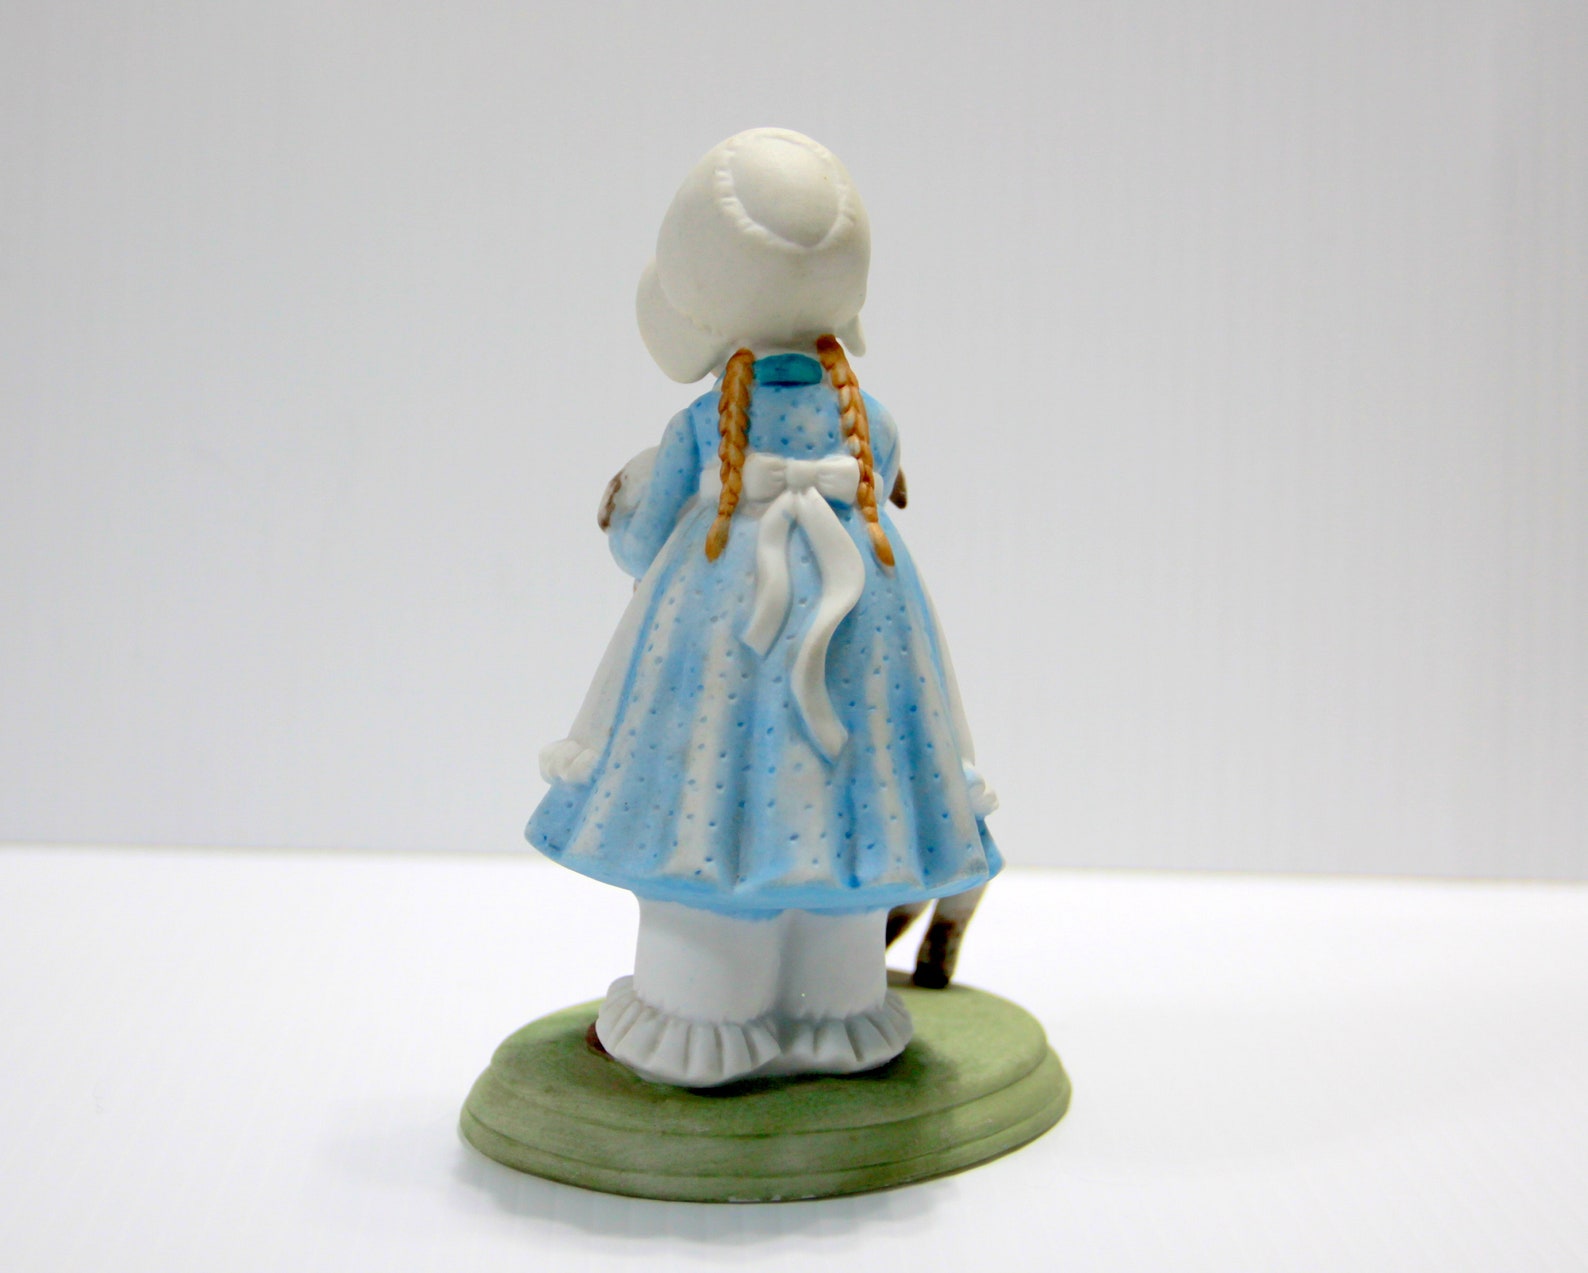 Vintage Holly Hobbie Figurine With Lambs. Limited Edition Hand Painted ...